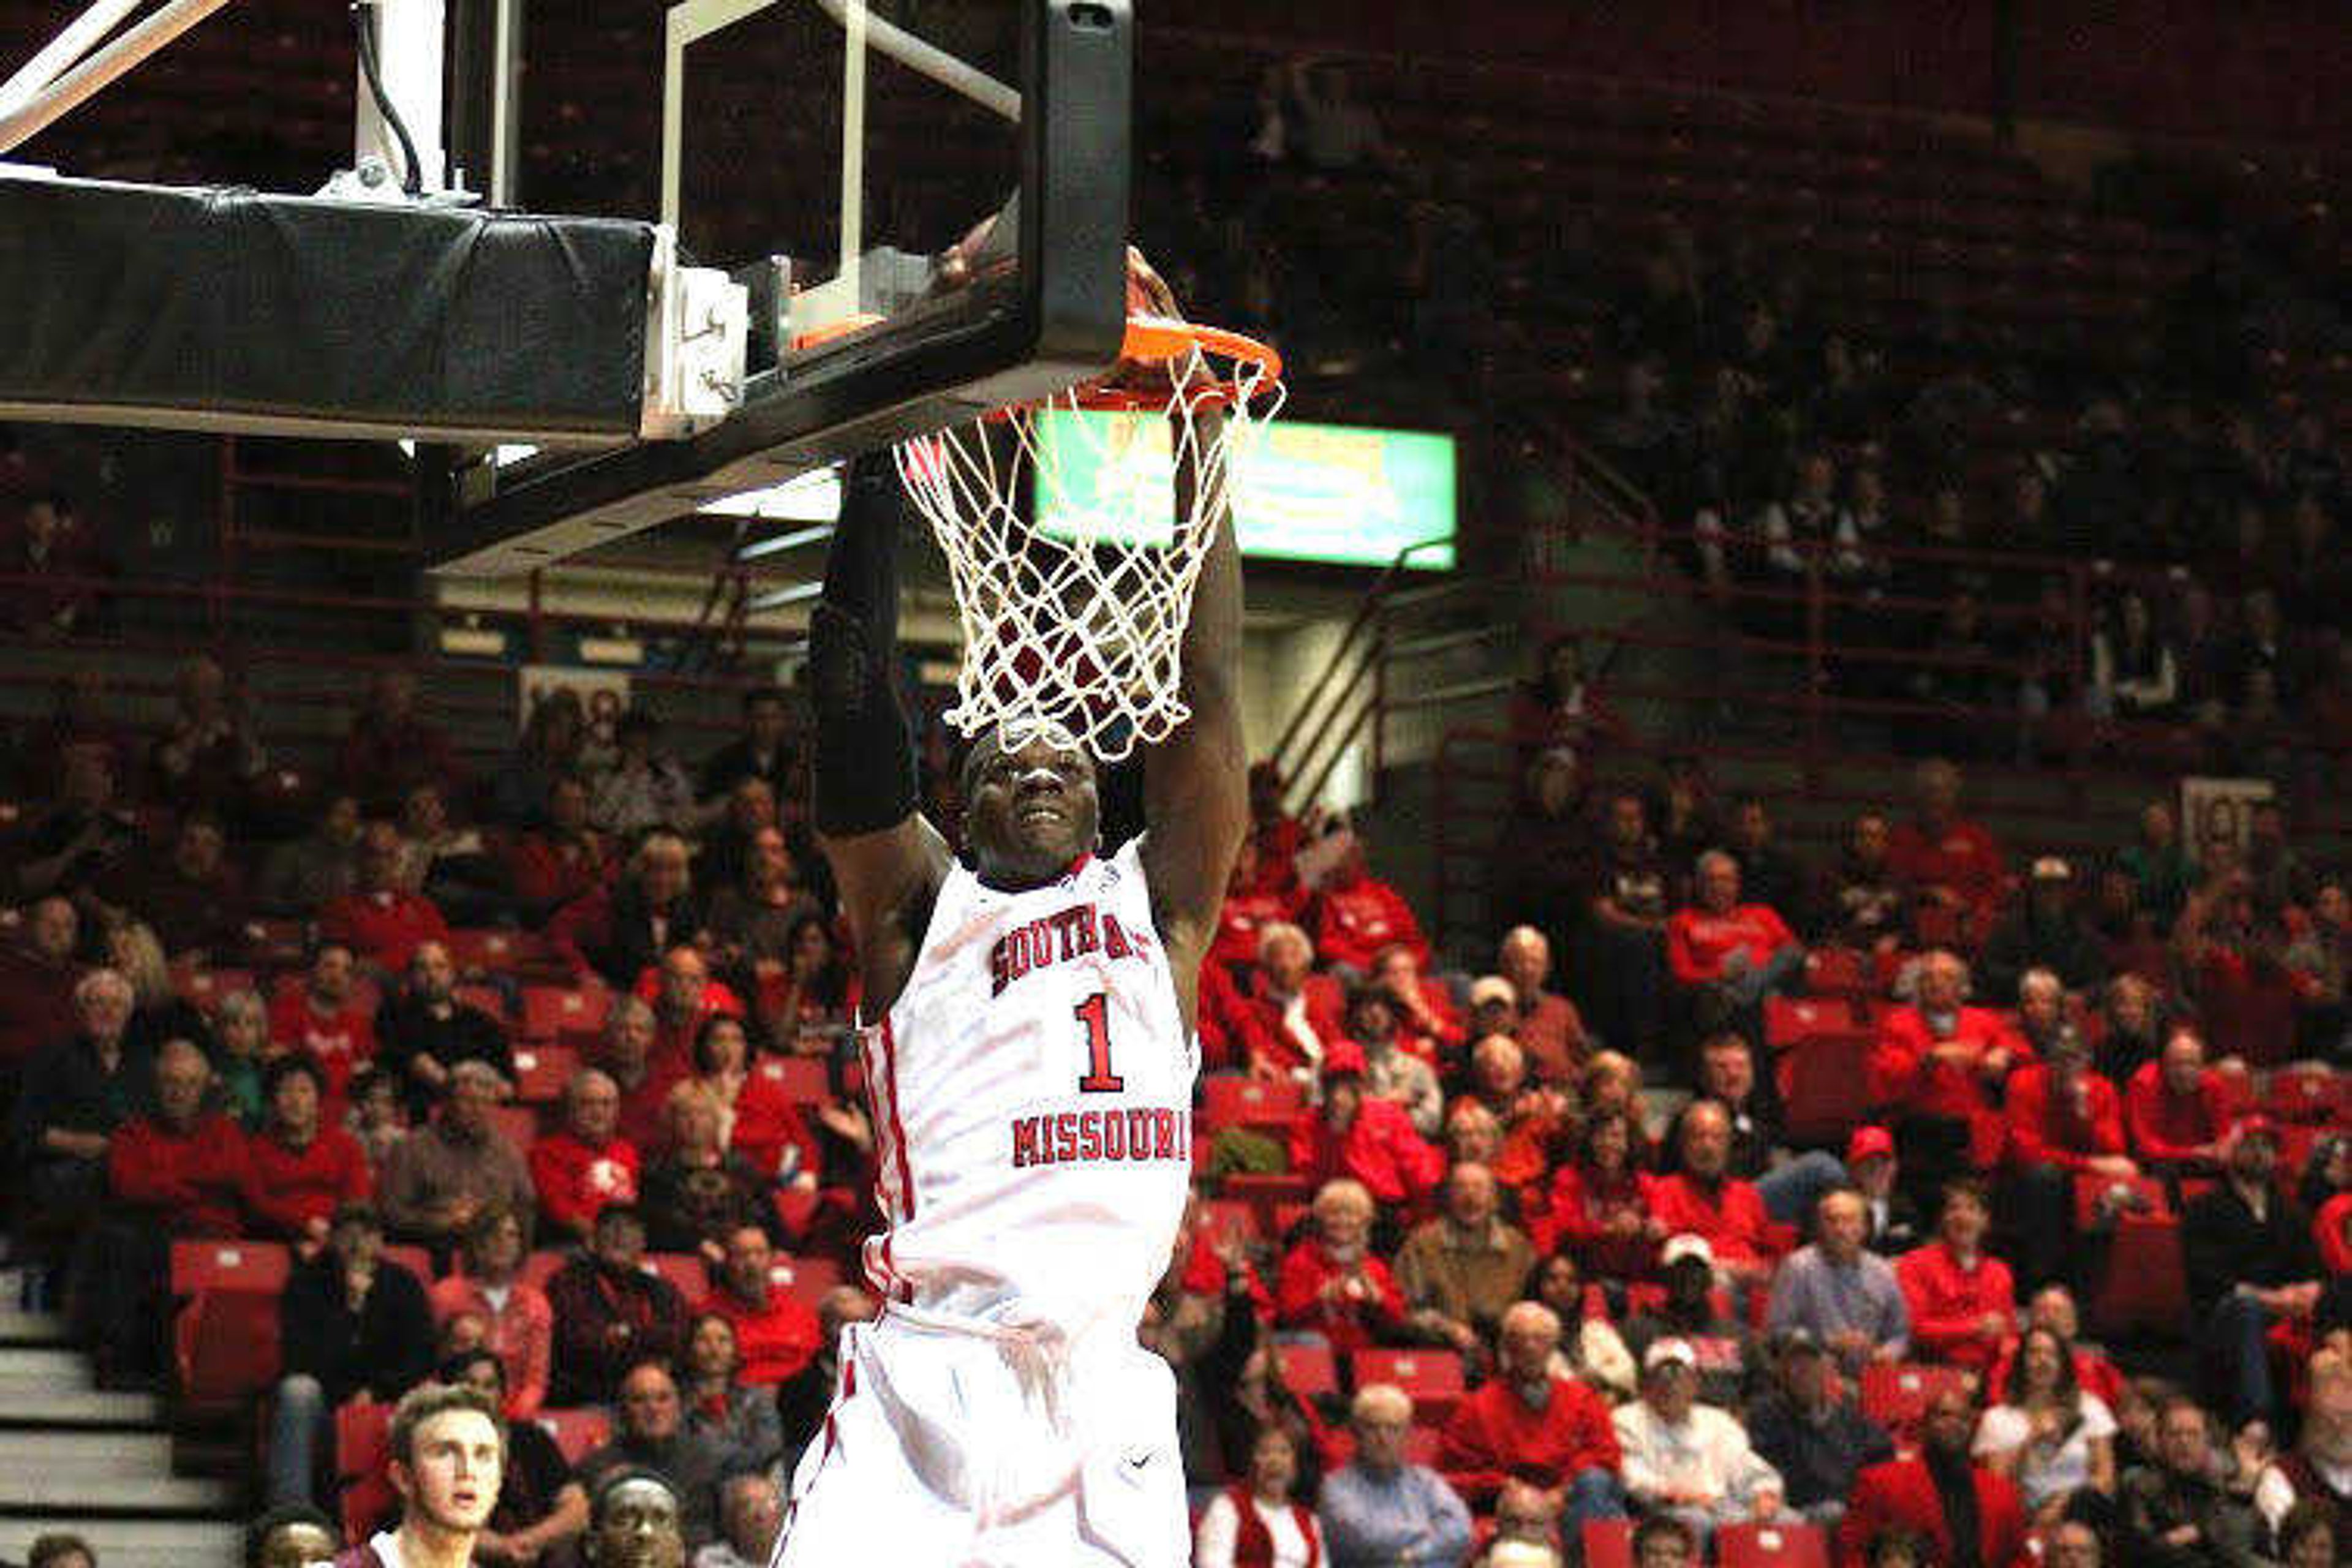 Senior forward Nino Johnson going to the rim against SIU-Carbondale on Dec. 10 at the Show Me Center. (Photo by J.C. Reeves)